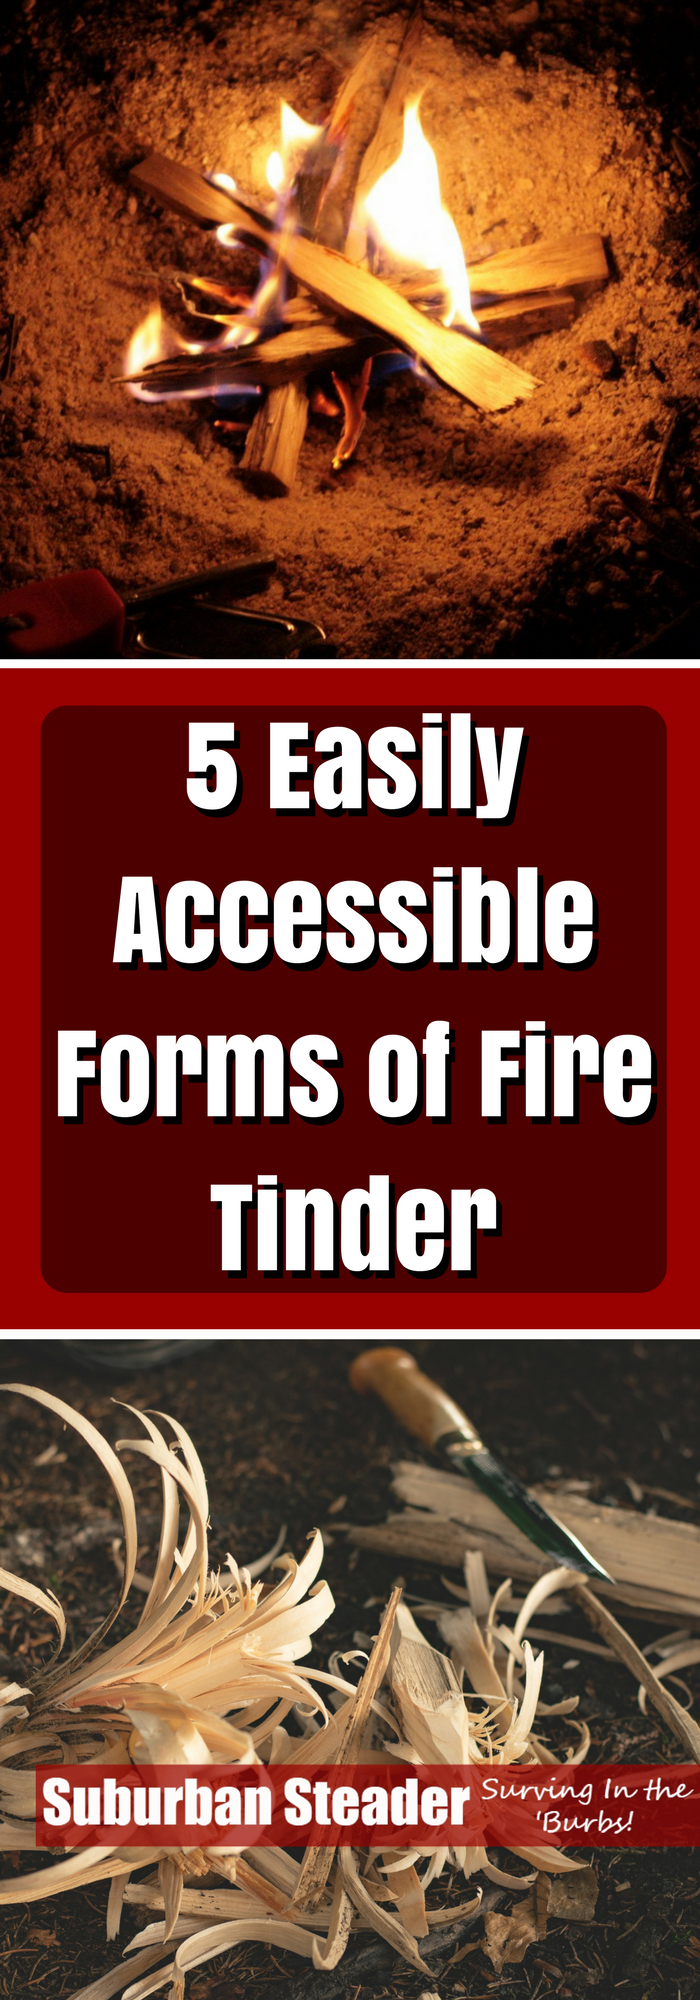 5 Forms of Easily Accessible Fire Tinder